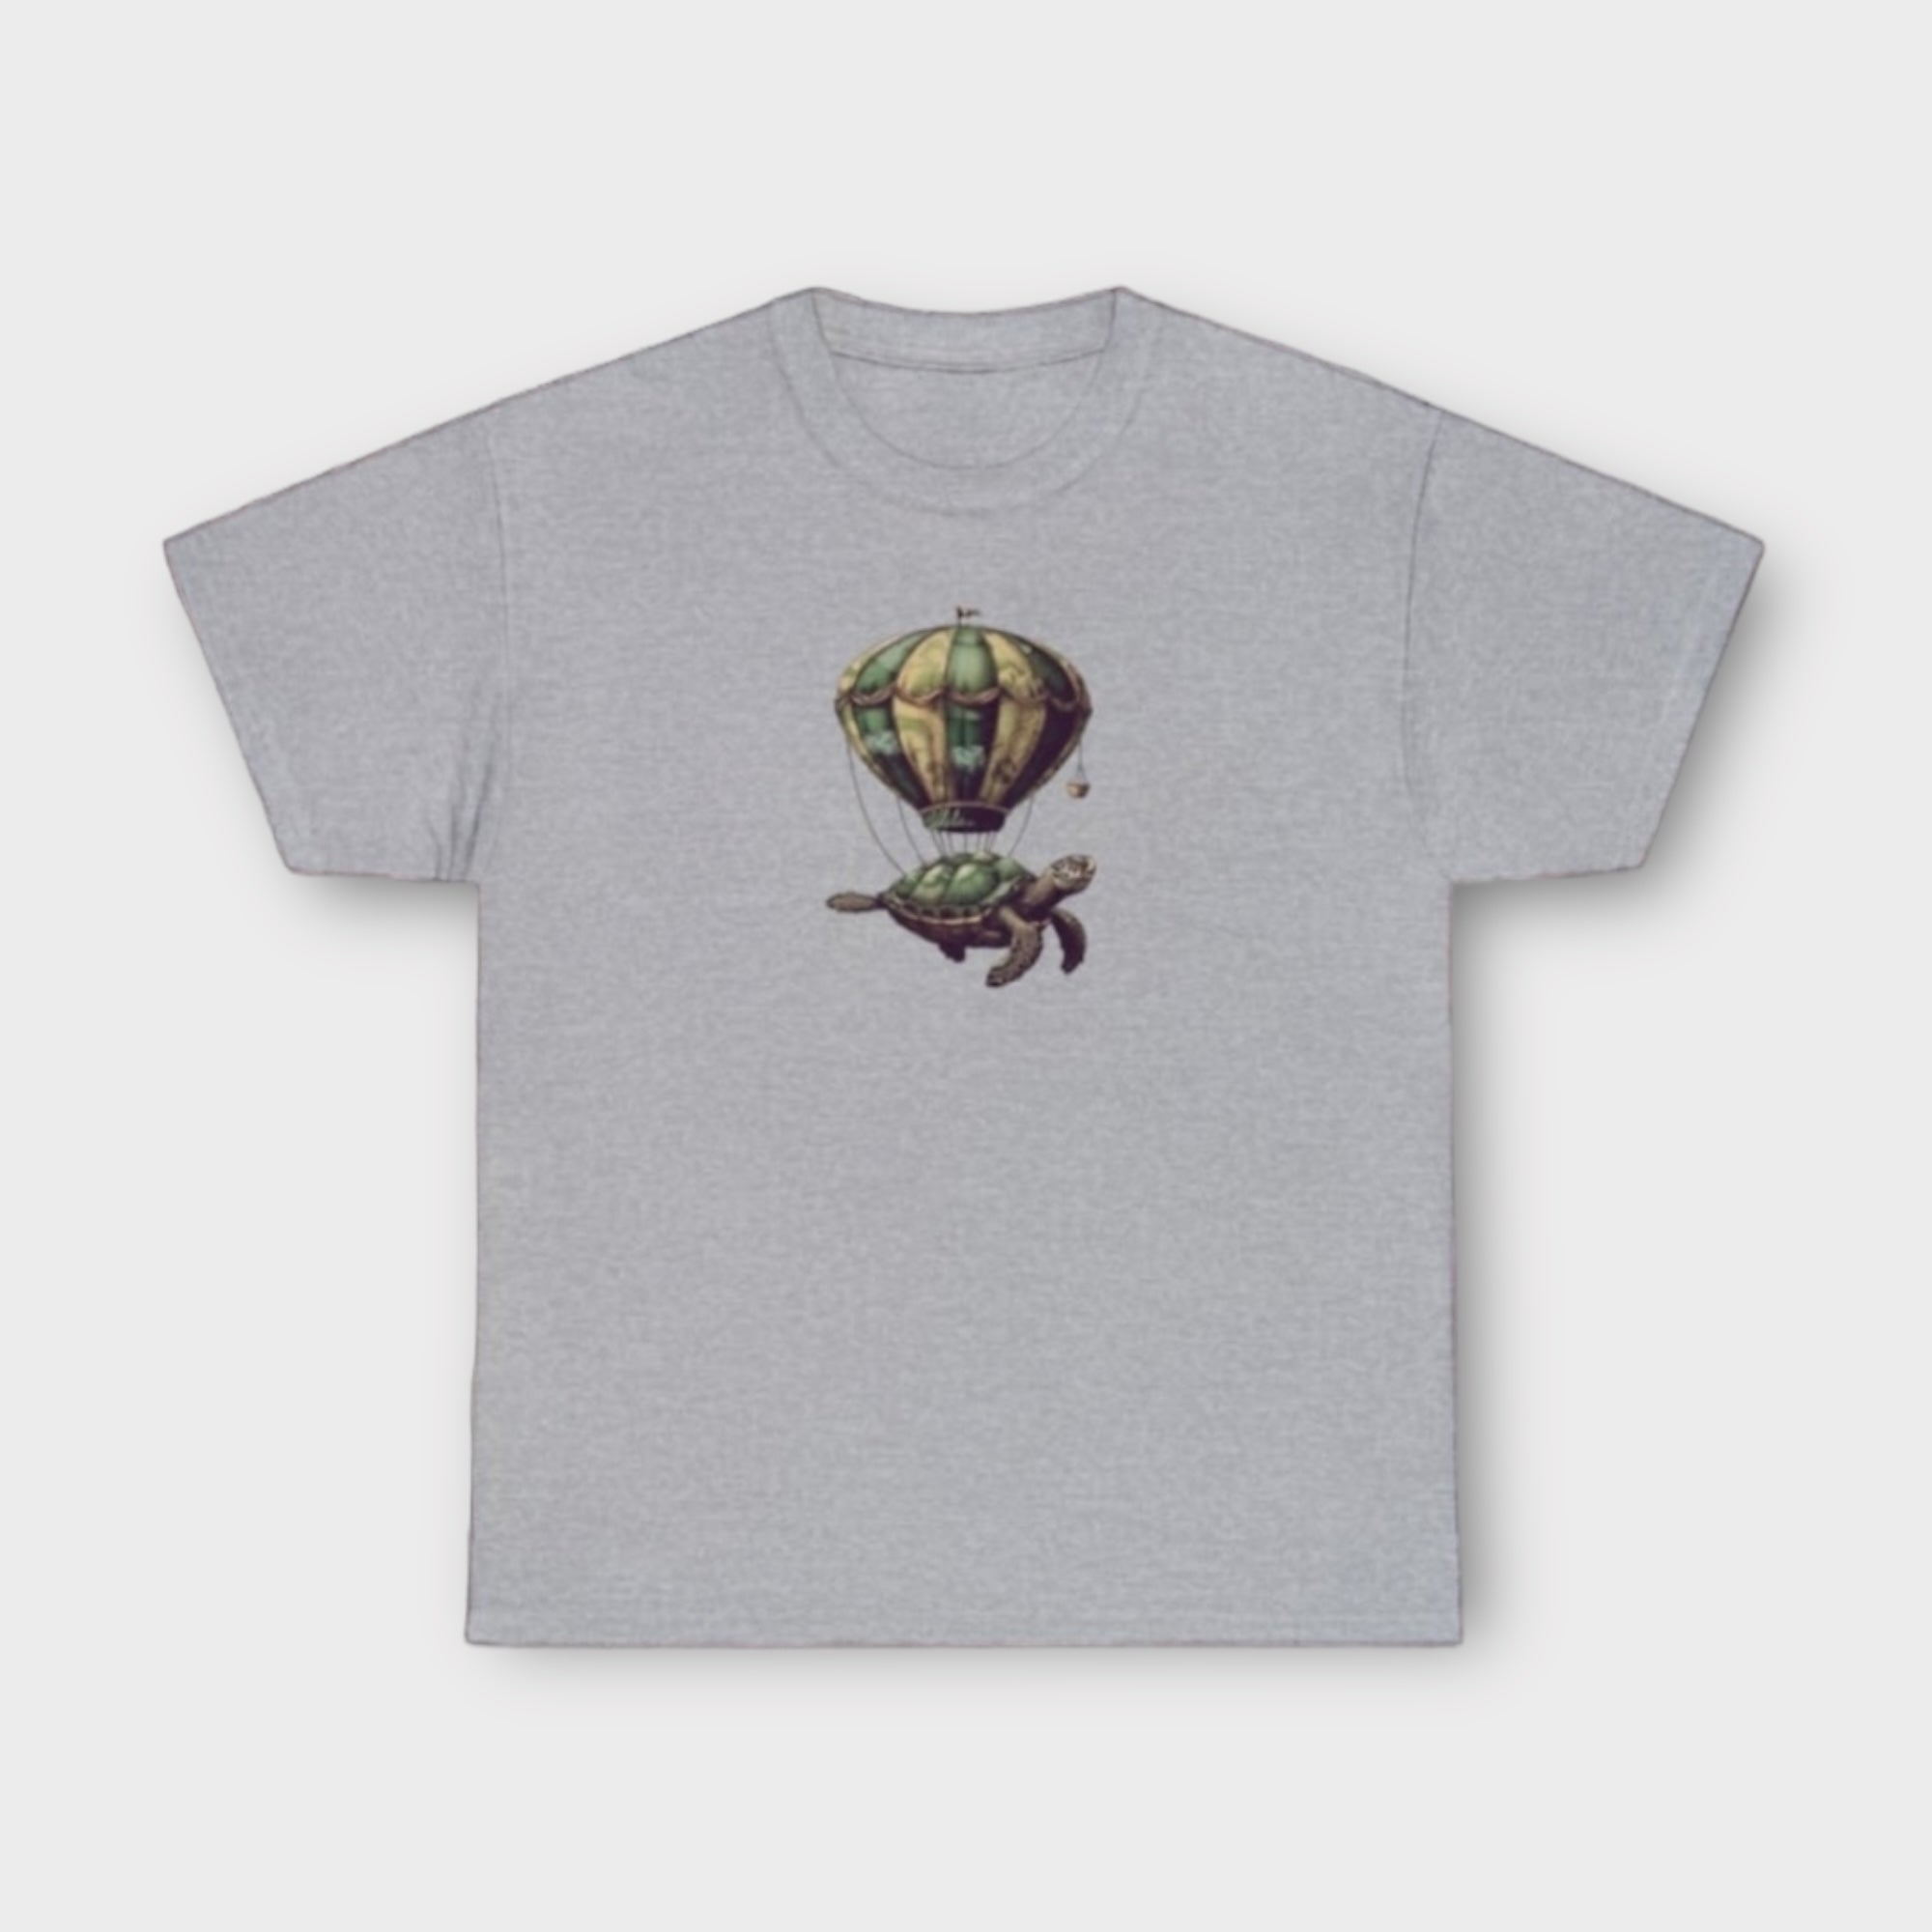 'FED' Turtle shirt with balloon for men and women